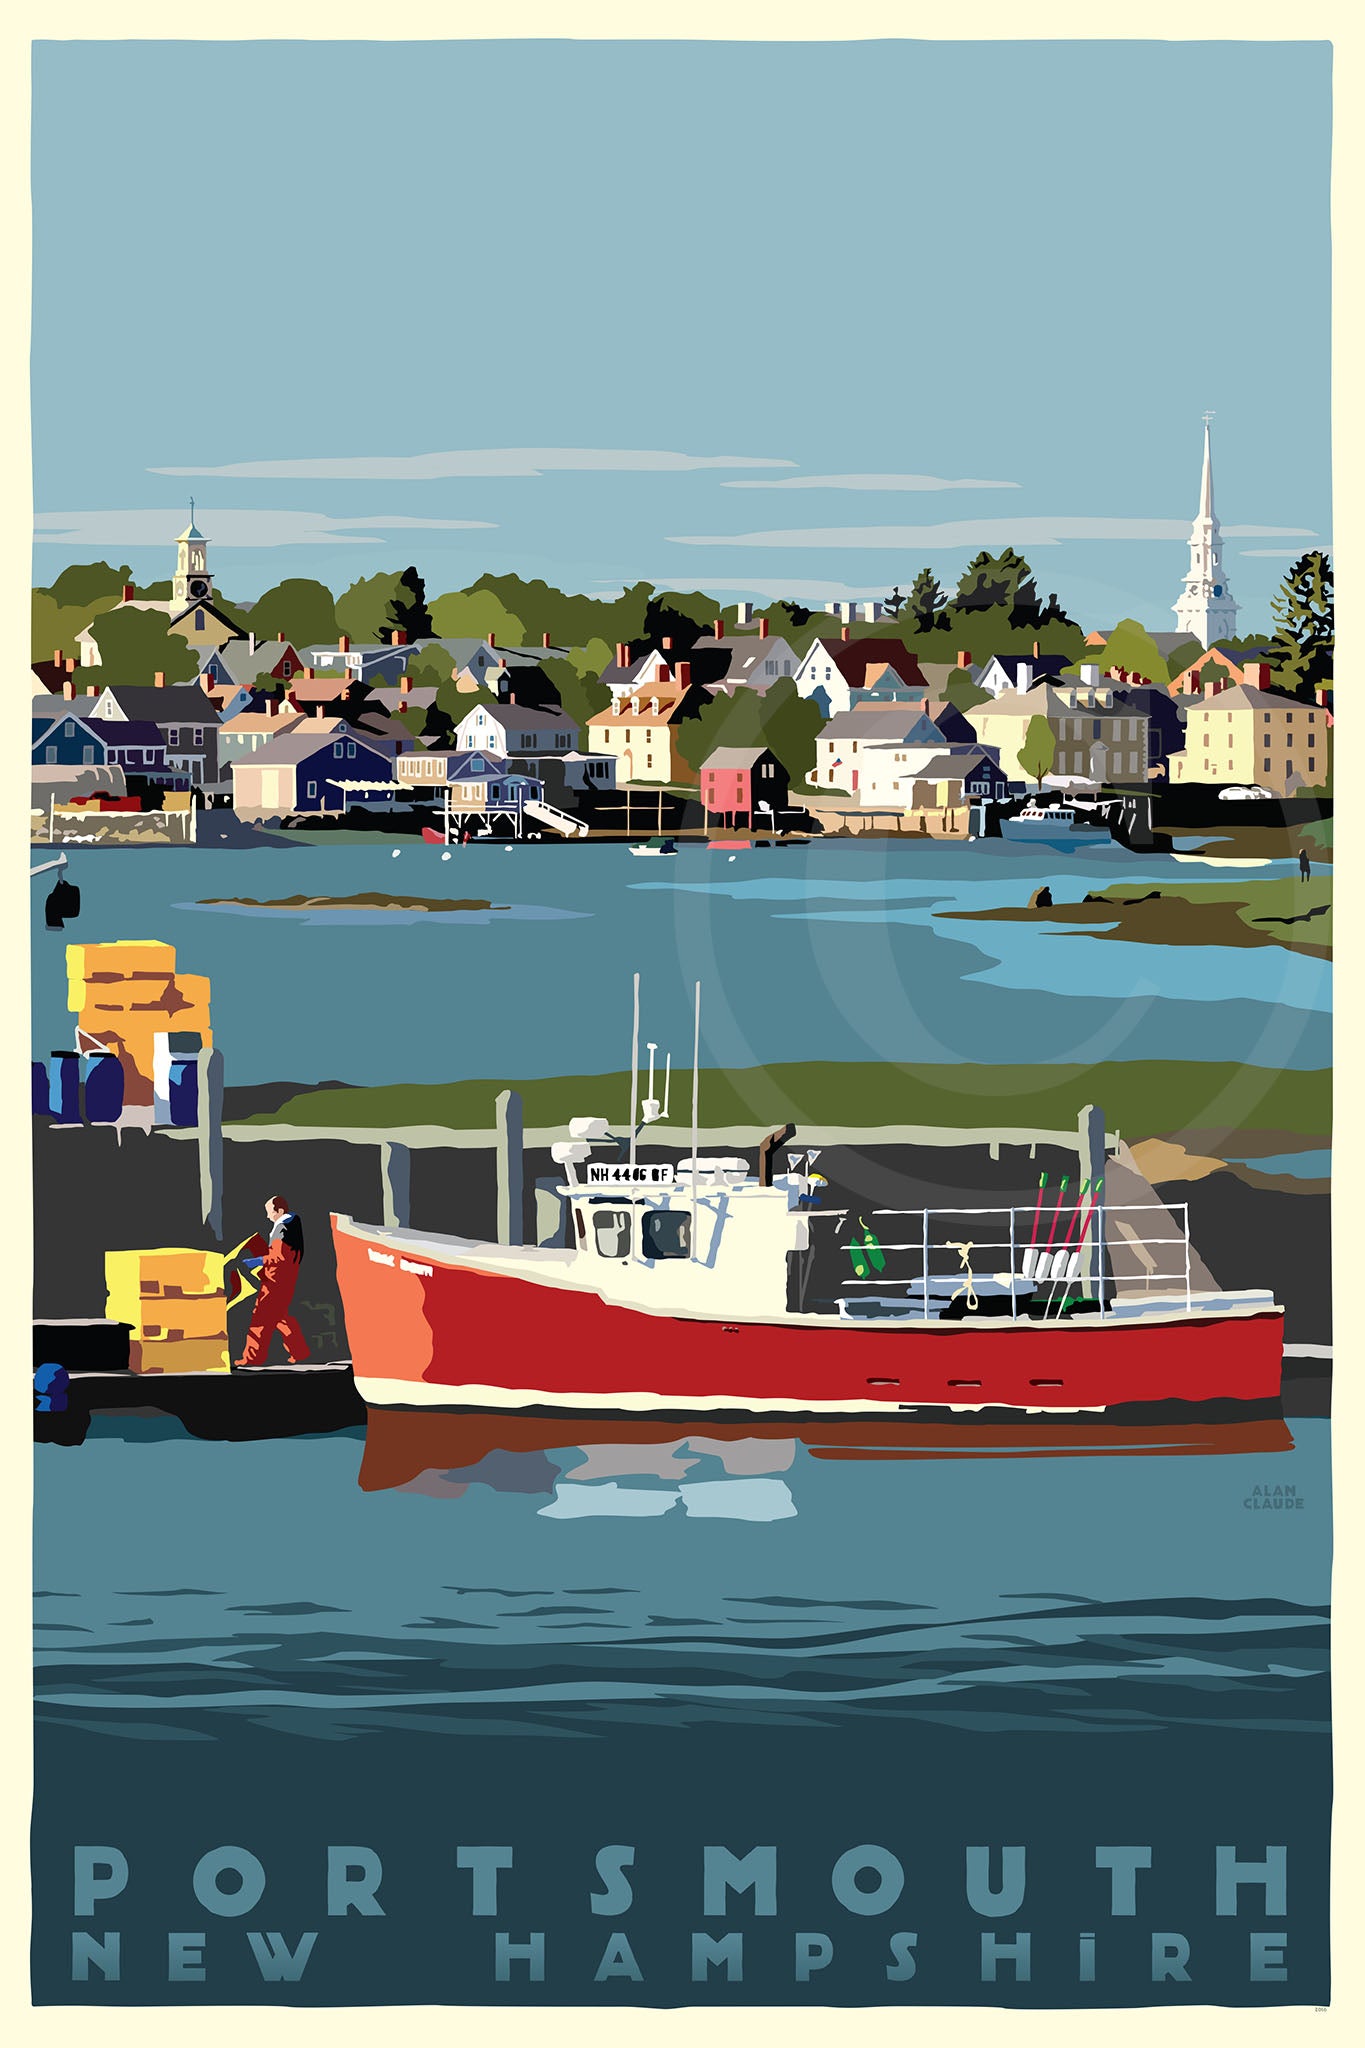 Portsmouth Lobster Boat Art Print 36" x 53" Travel Poster By Alan Claude - New Hampshire